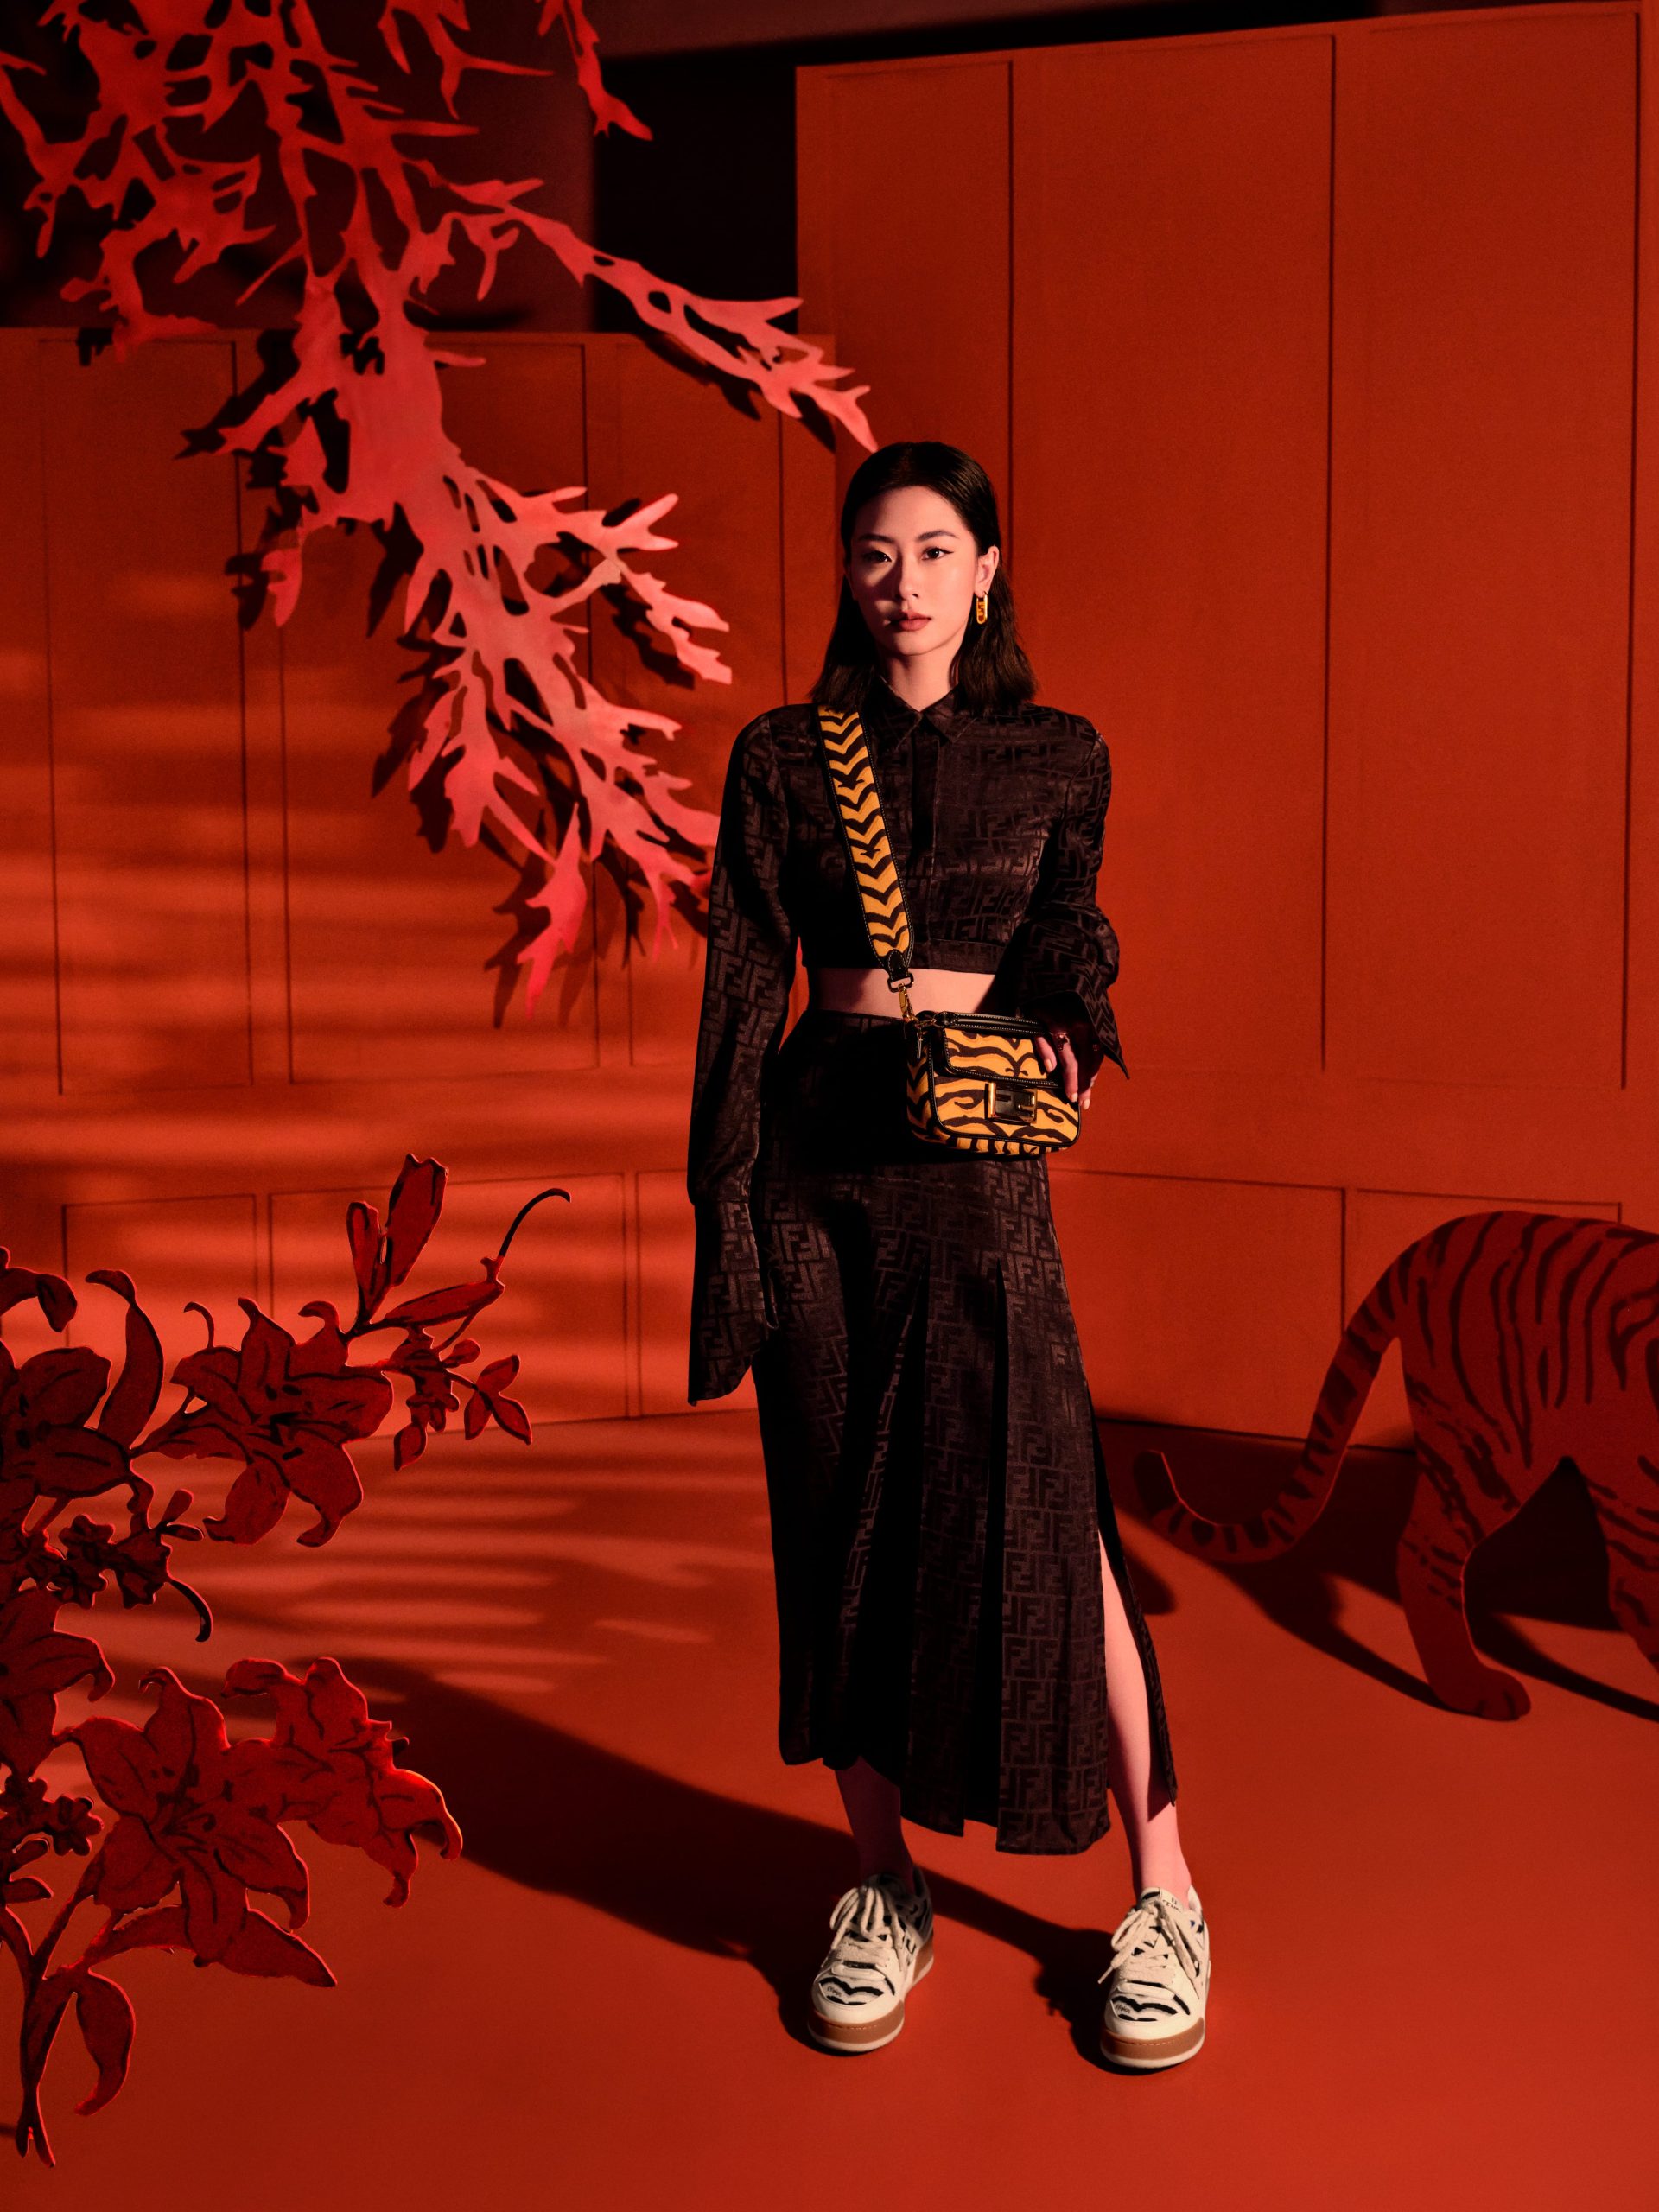 FENDI Celebrates Lunar New Year with the 2022 Spring Festival Capsule Collection!